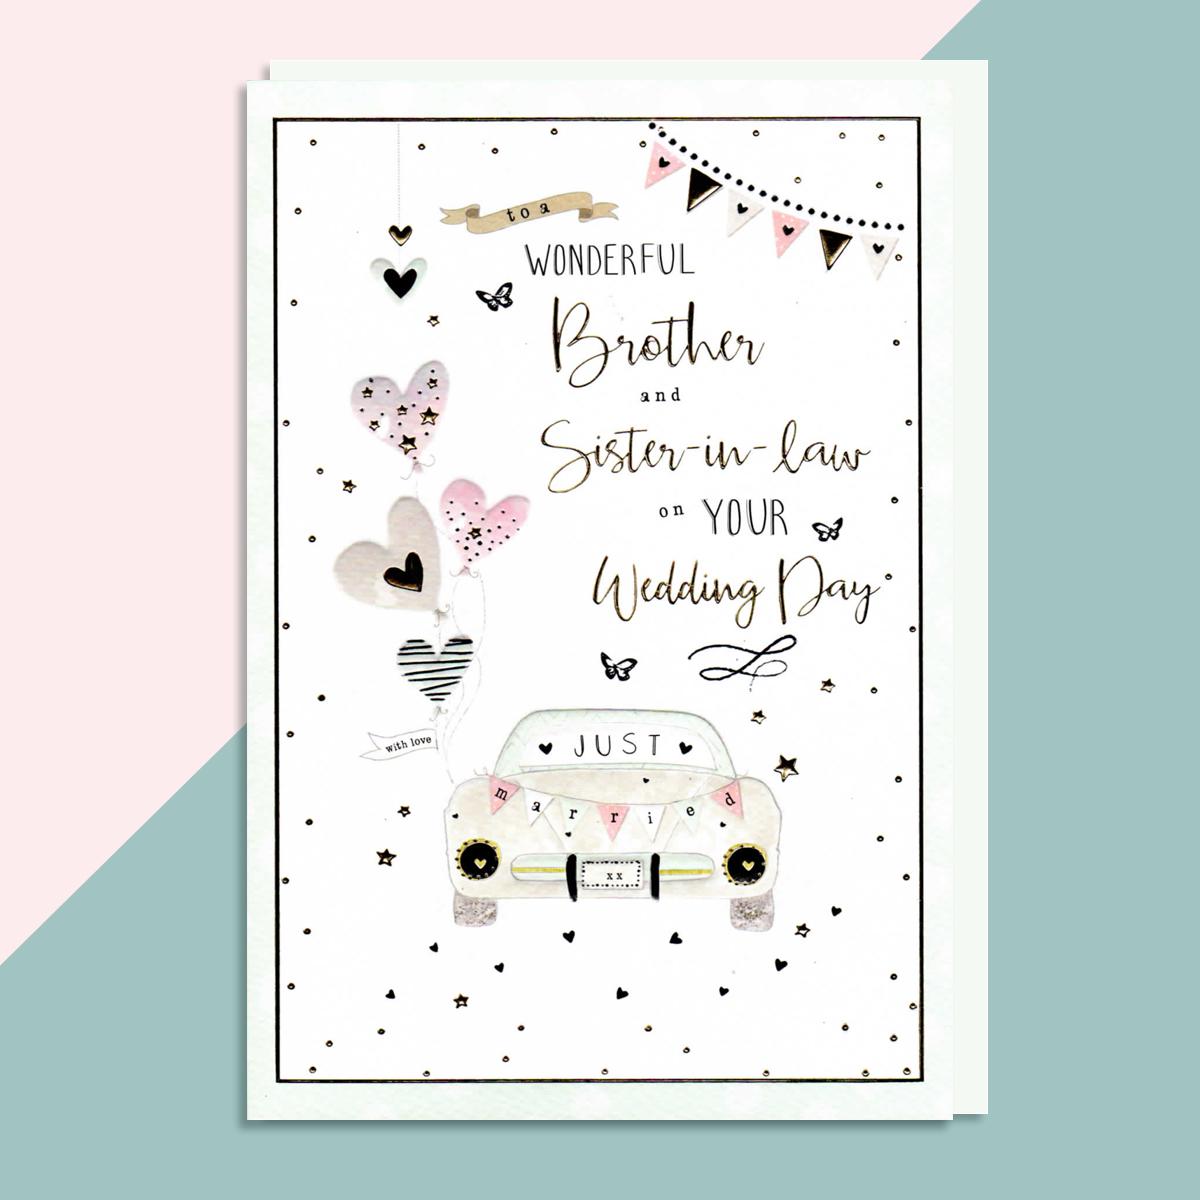 A Selection Of Cards To Show The Depth Of Range In Our Brother And Sister Wedding Card Section